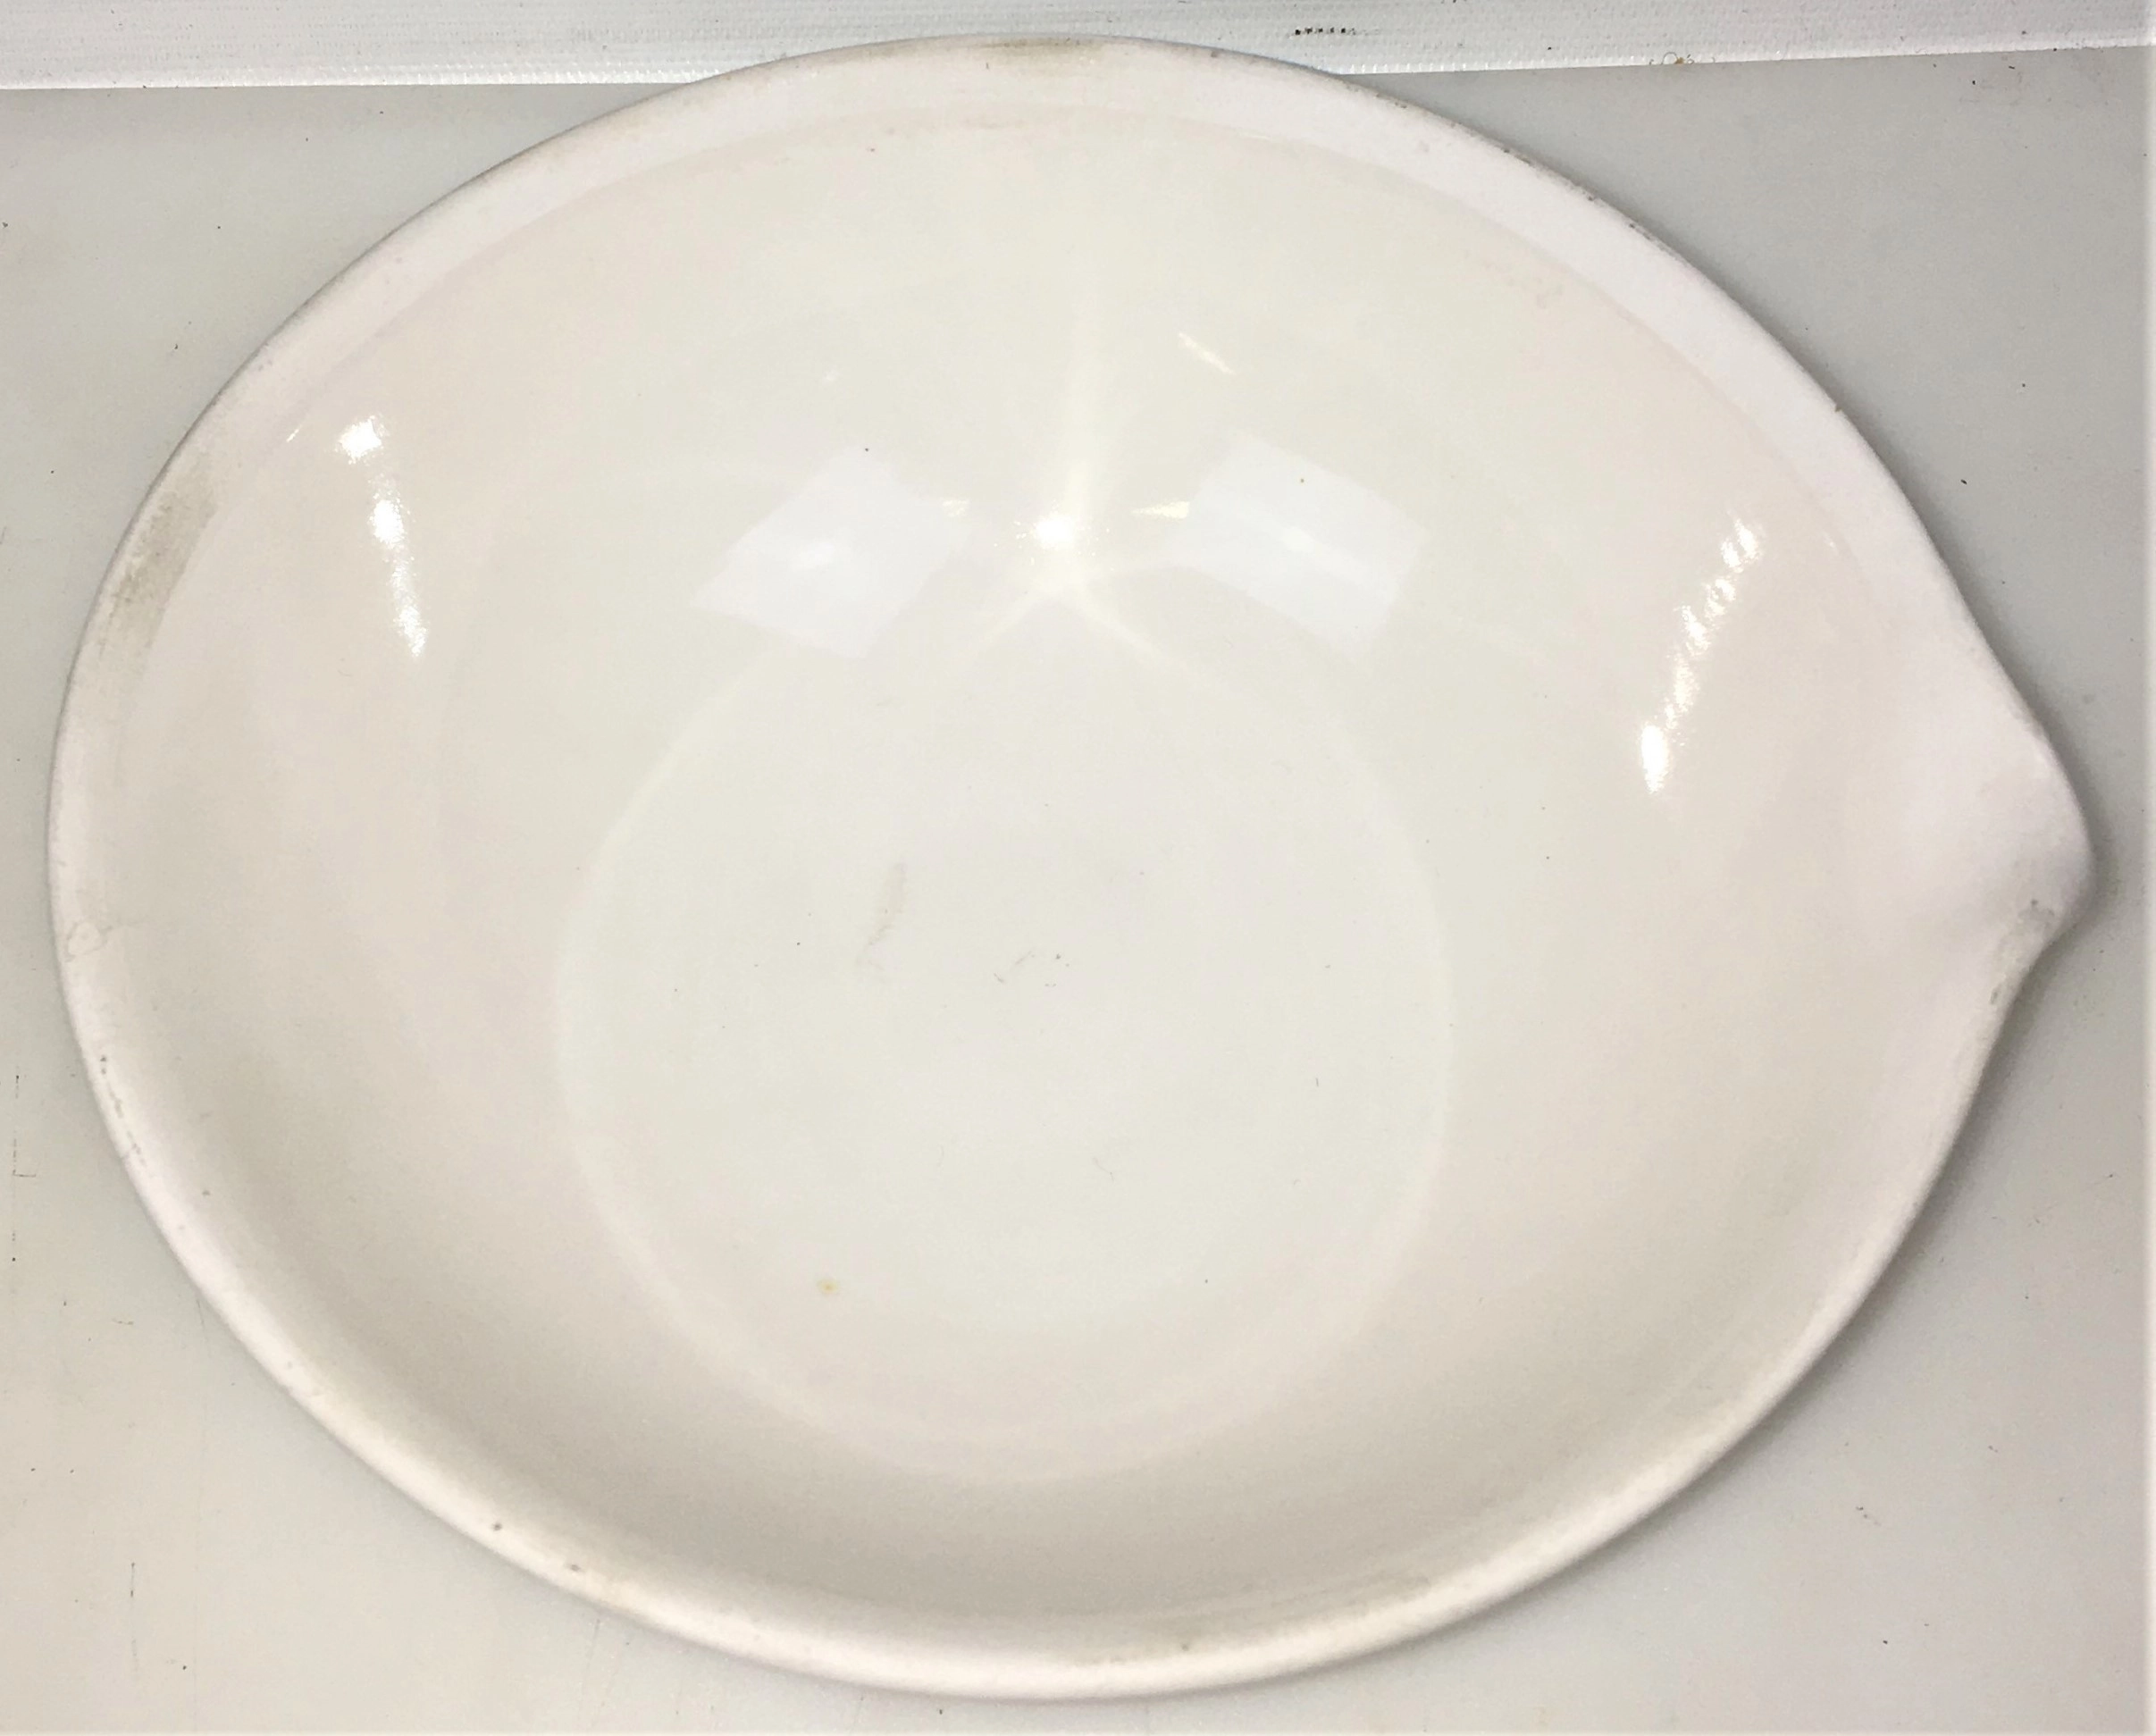 CooksTek 60204 Evaporating Dish with Pouring Lip - 385mL